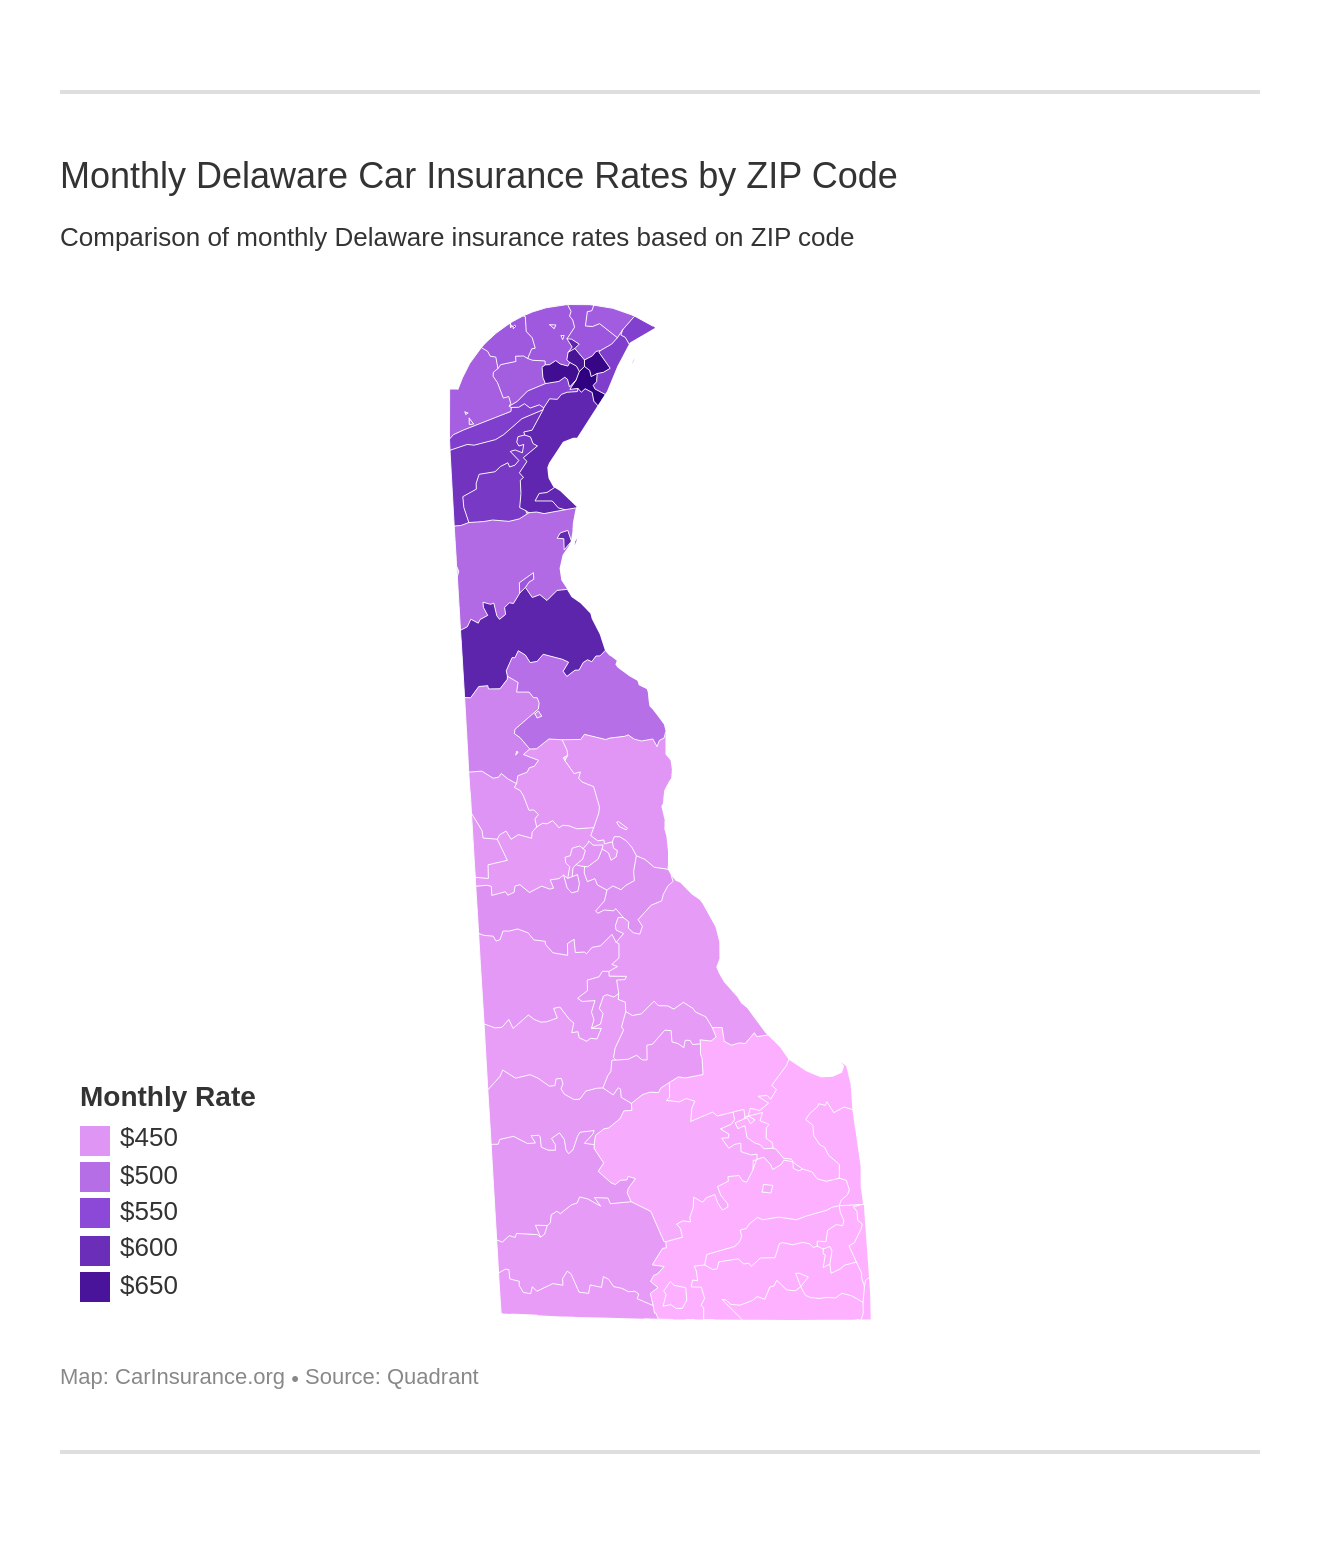 Monthly Delaware Car Insurance Rates by ZIP Code